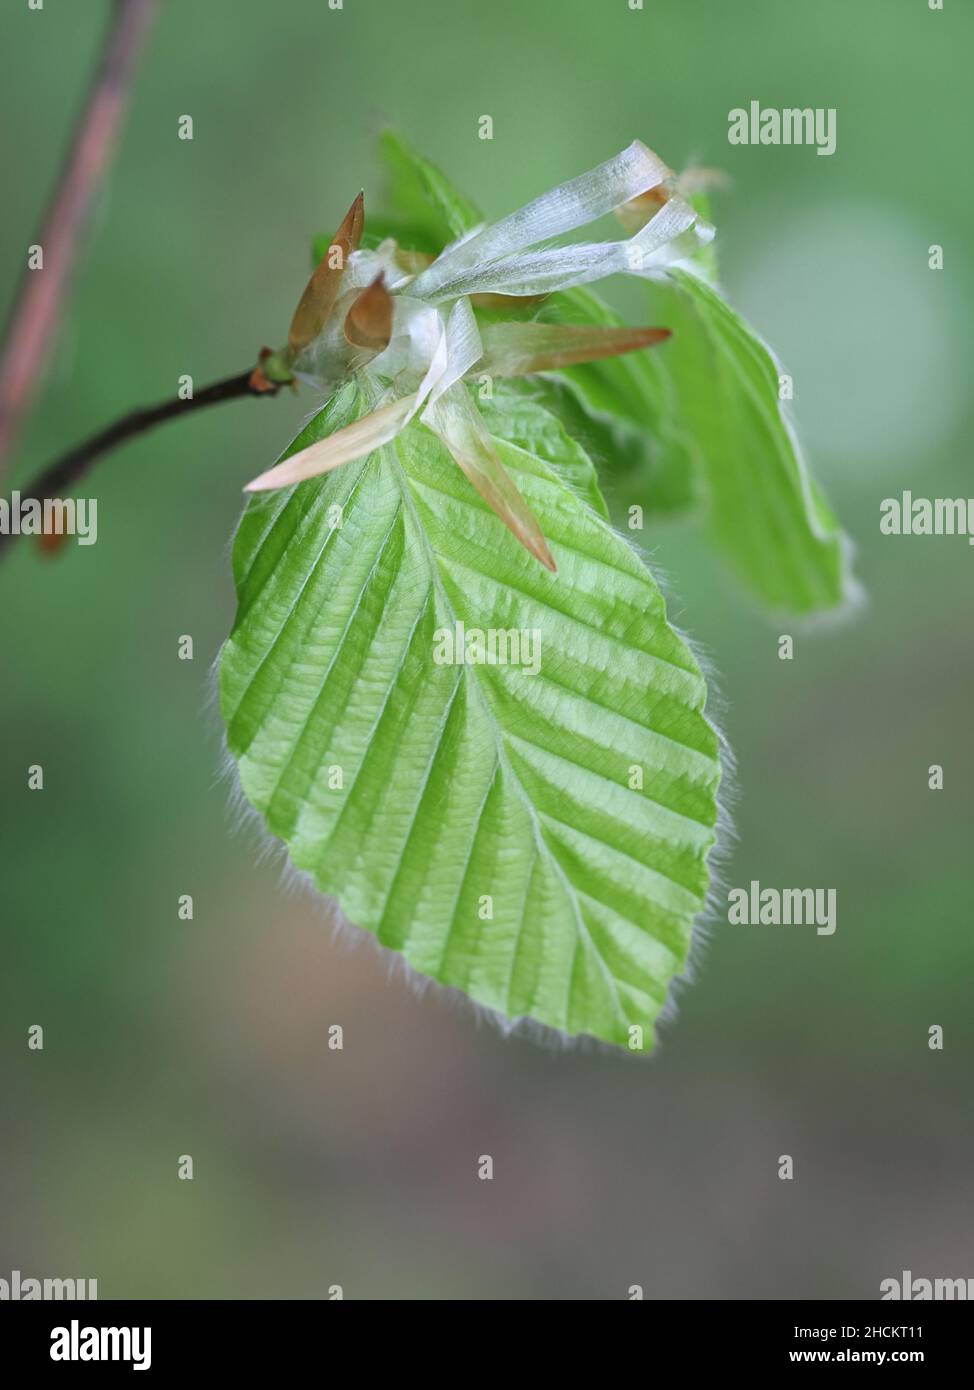 Fagus sylvatica, known as European beech or common beech, close-up of  new leaves Stock Photo